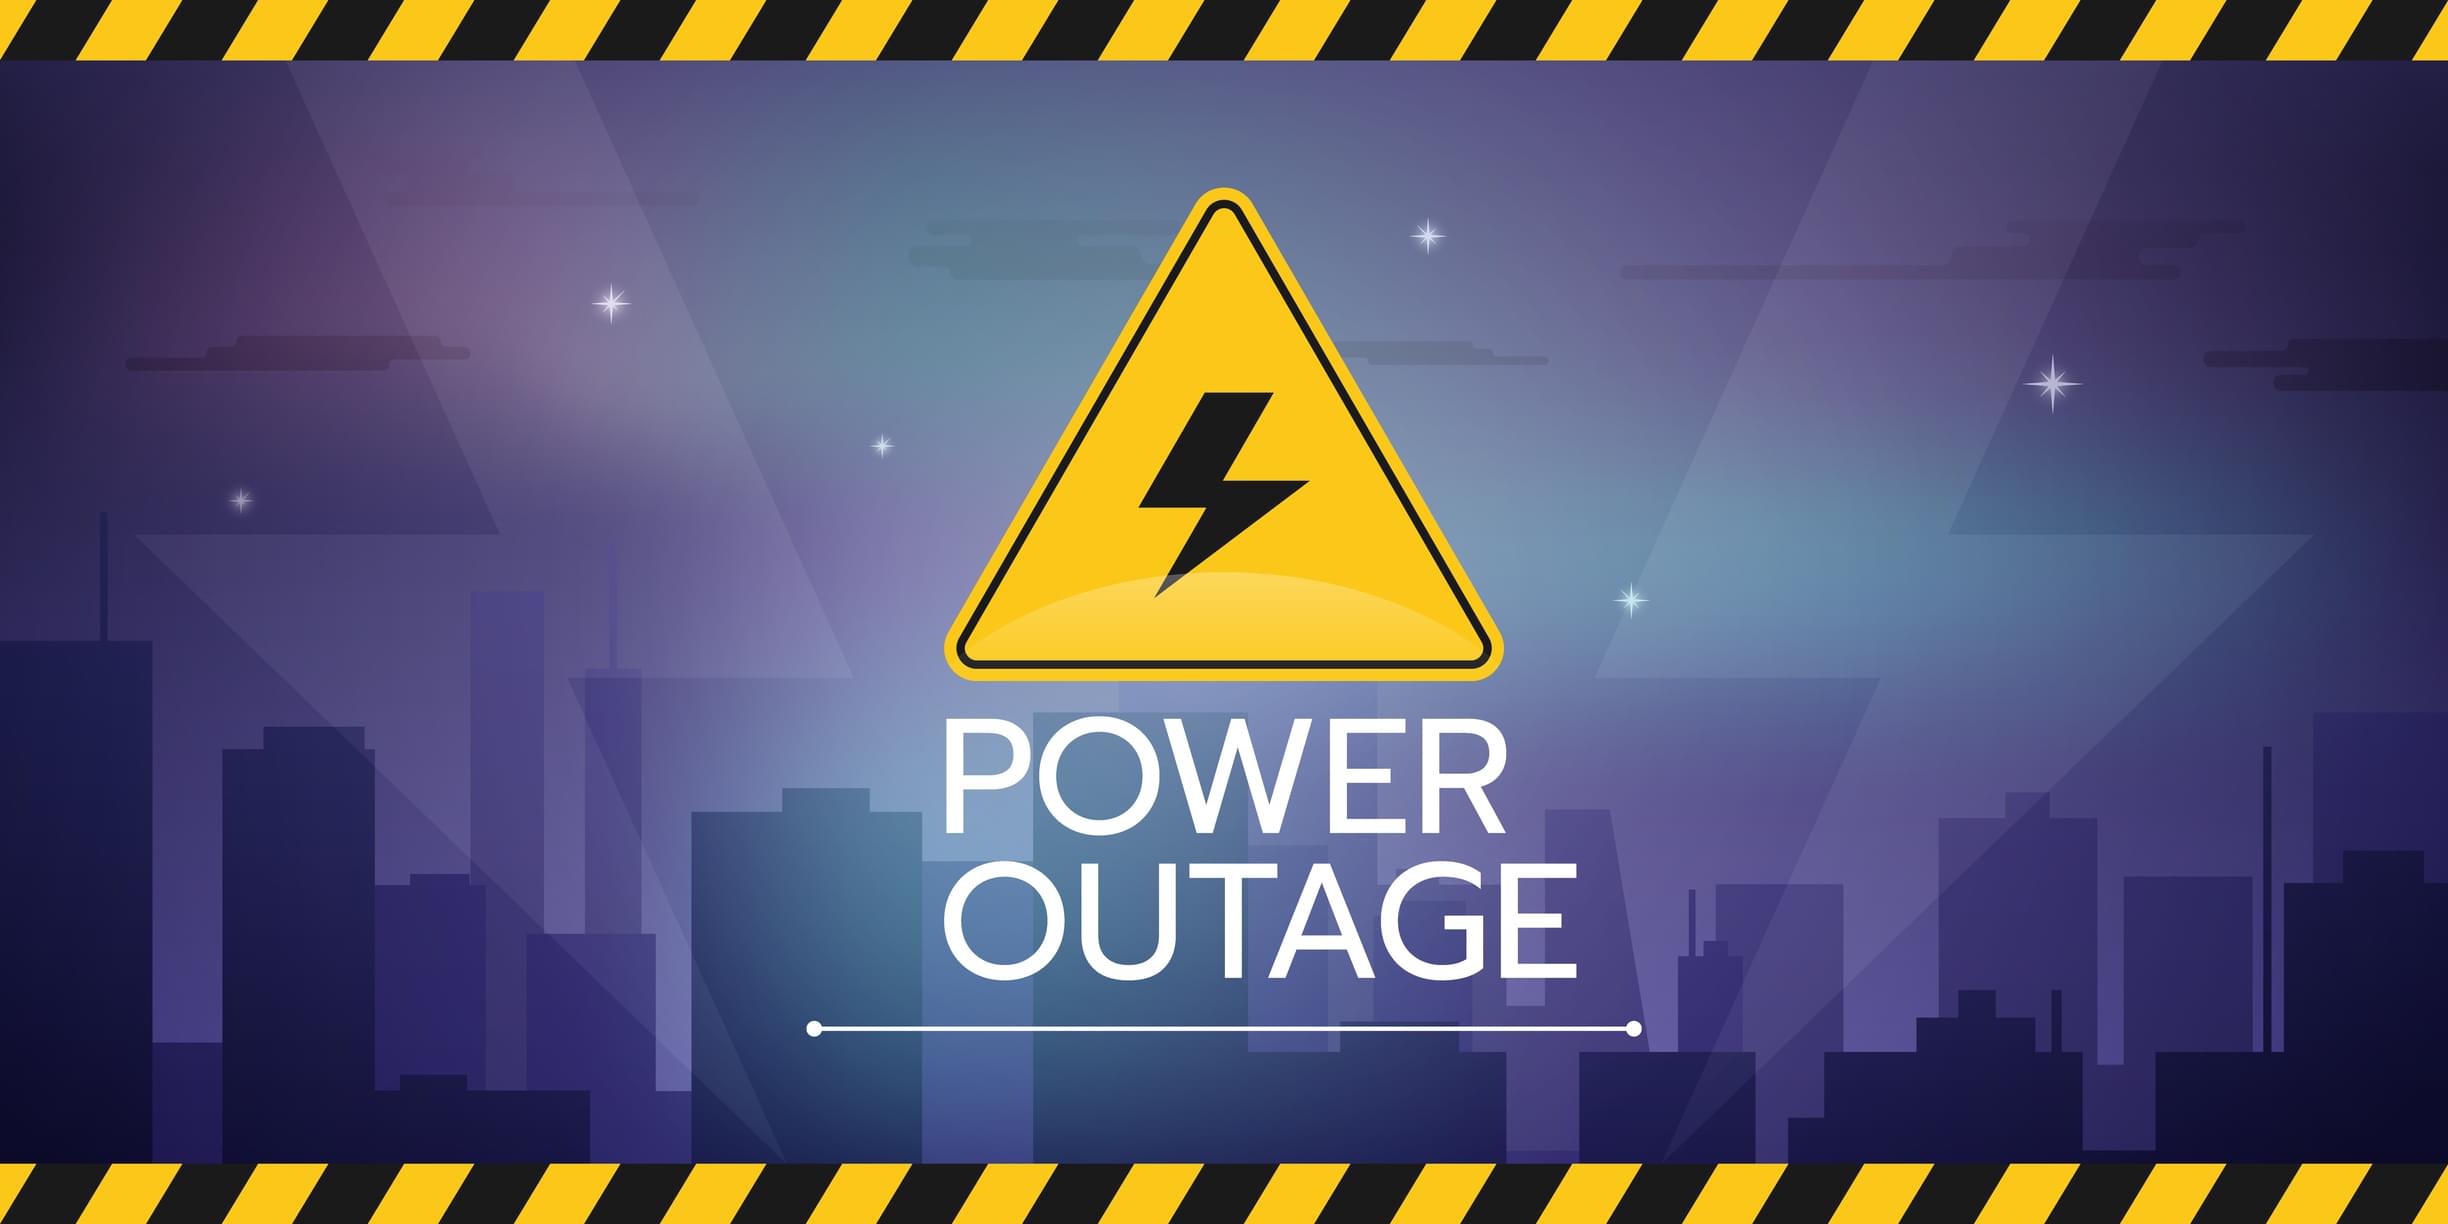 Melissa in the Morning: Seriously with these outages???